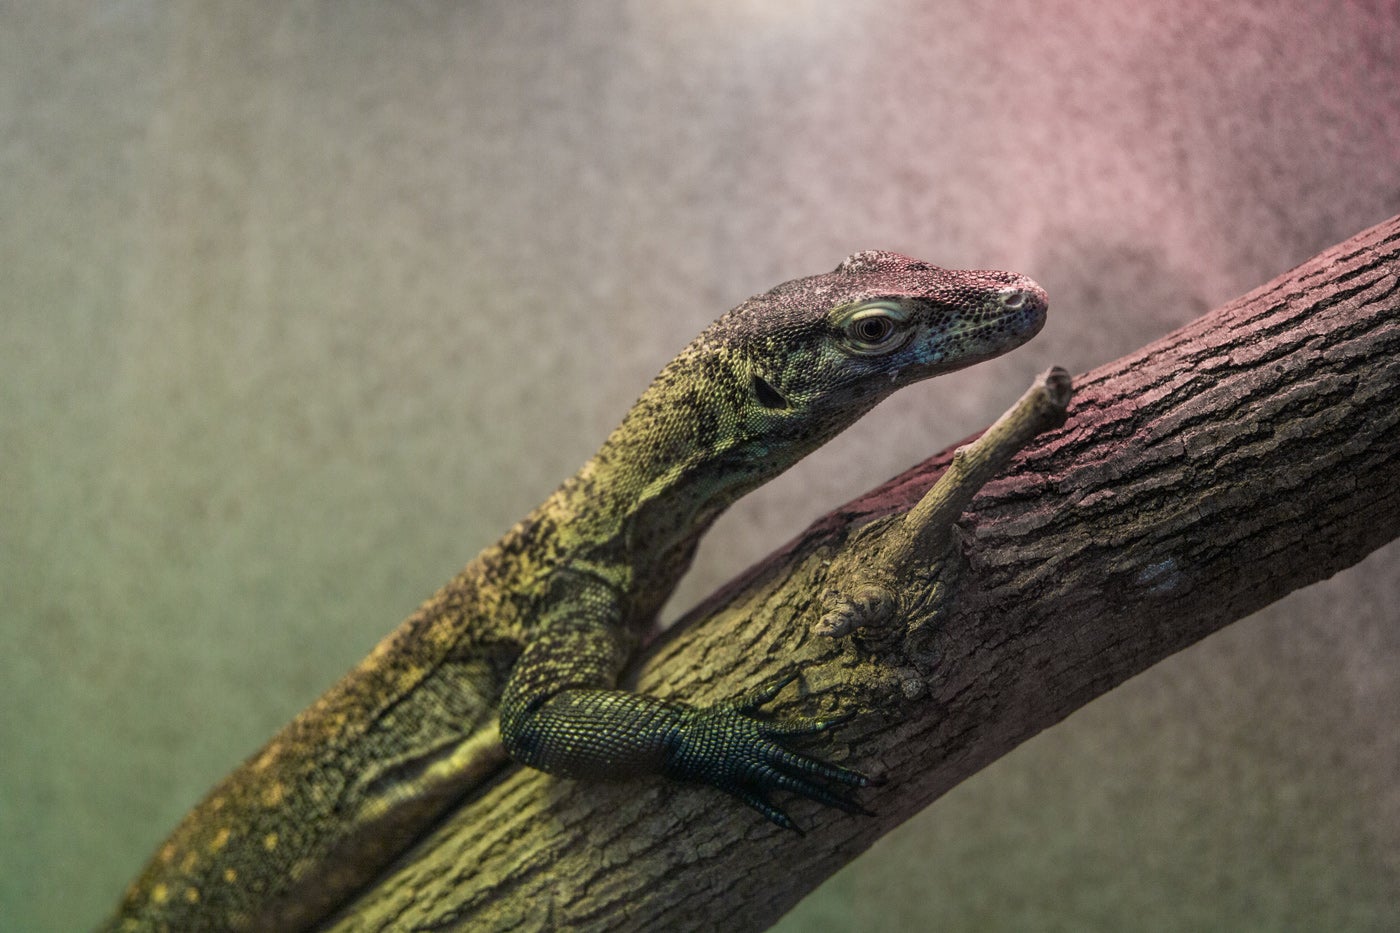 A young Komodo dragon (monitor lizard) with a long, slender body resting on a tree branch